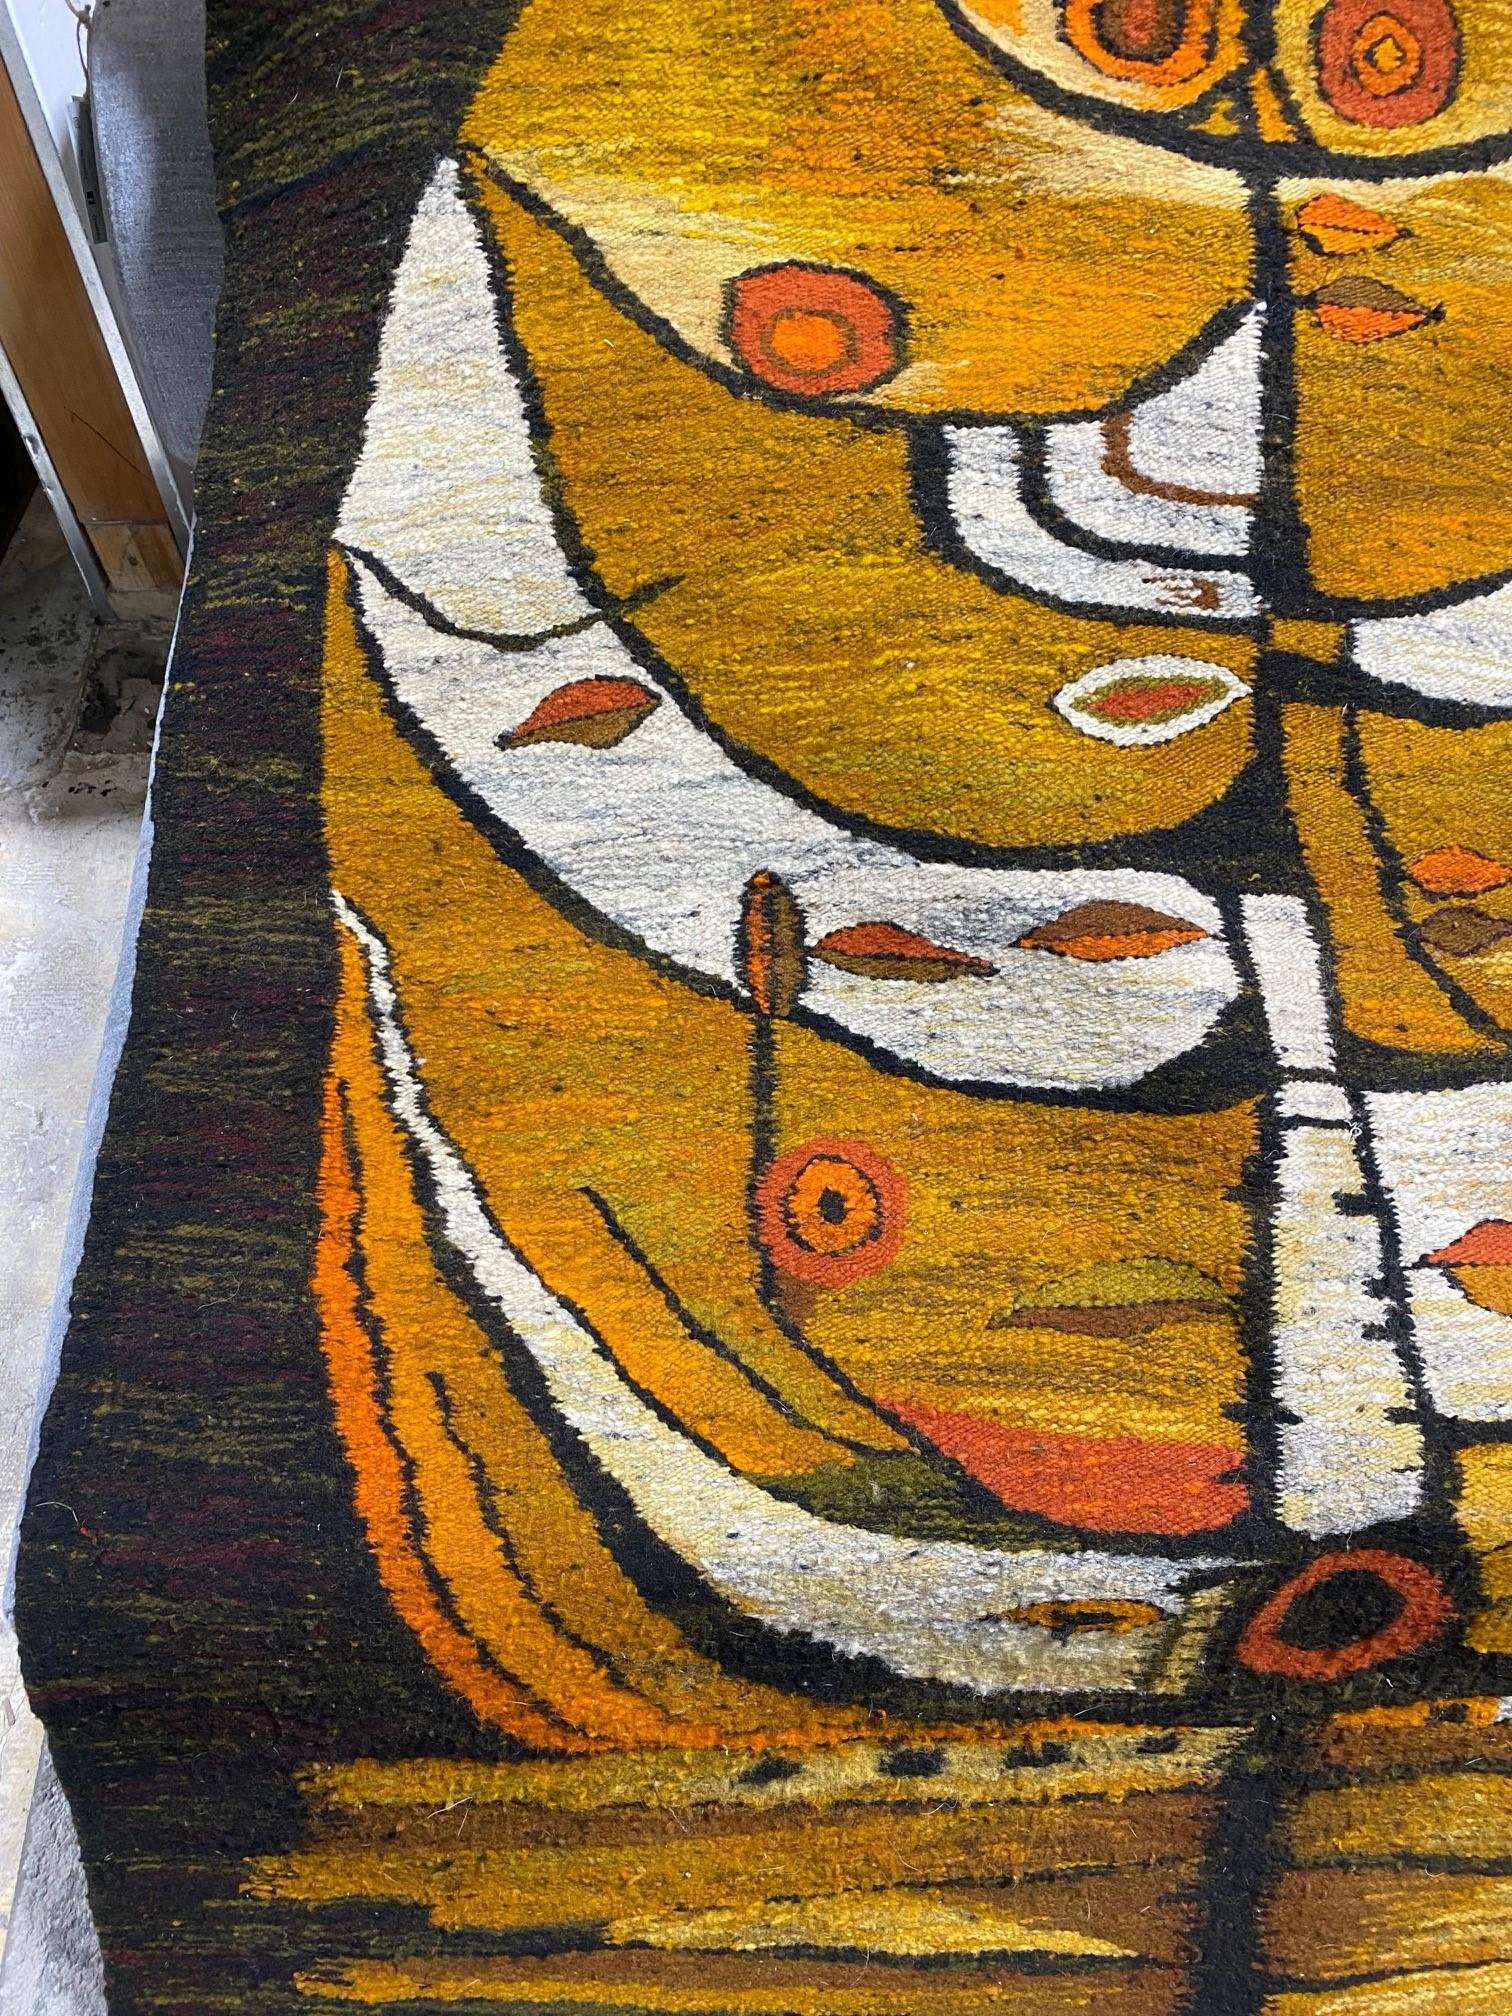 Large Mid-Century Modern European Polish Cepelia Tapestry Wall Hanging Rug In Good Condition For Sale In Studio City, CA